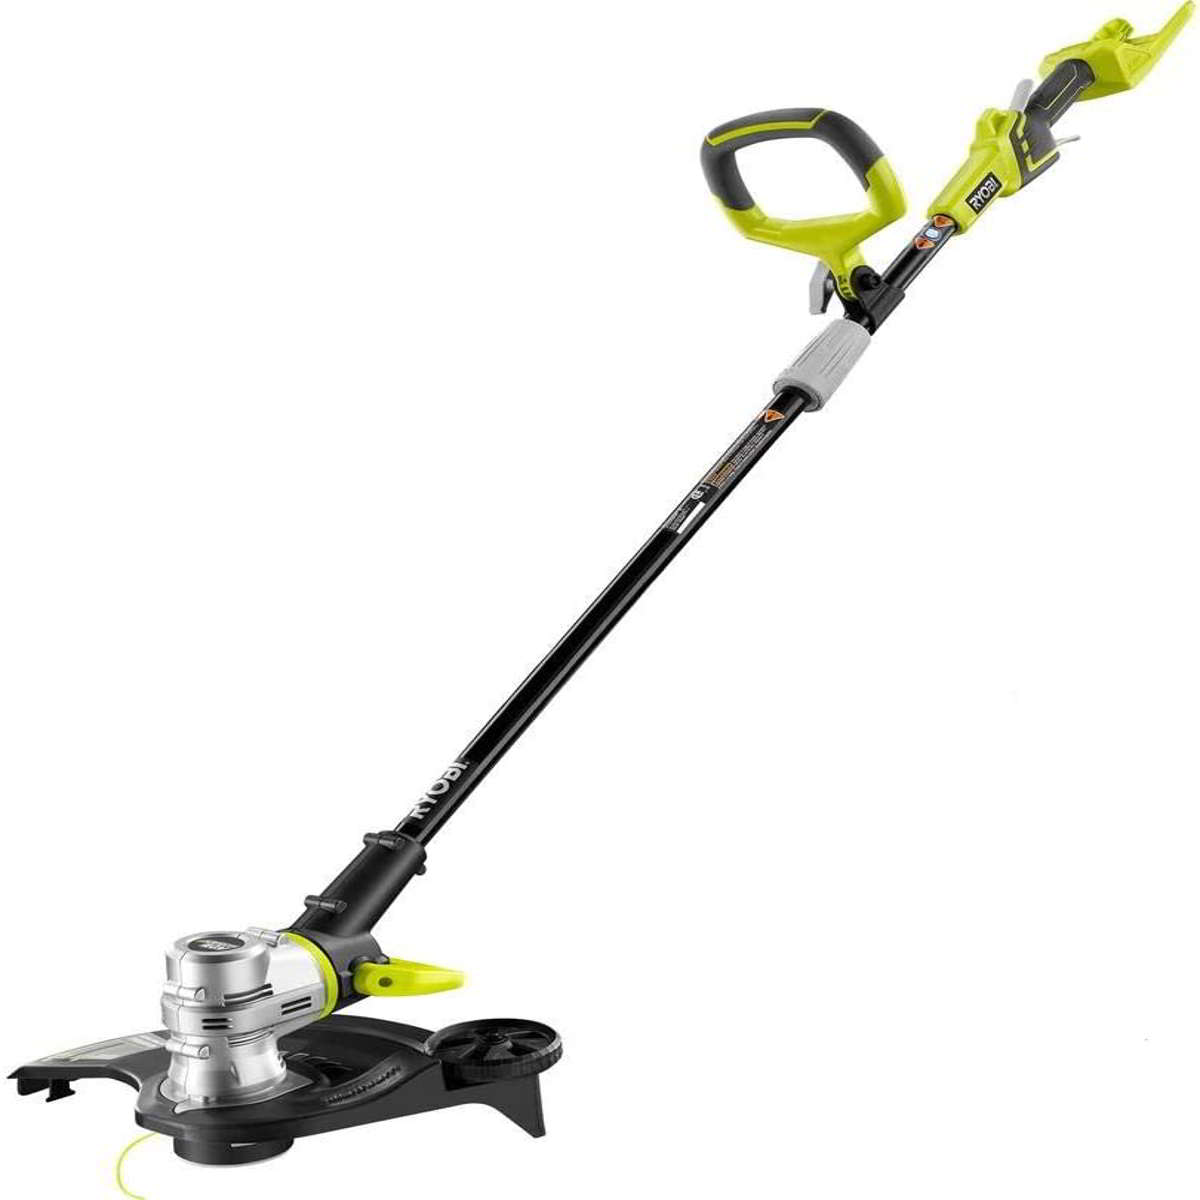 Ryobi 40v String Trimmer Troubleshooting Guide [easy Fixes] Machinelounge